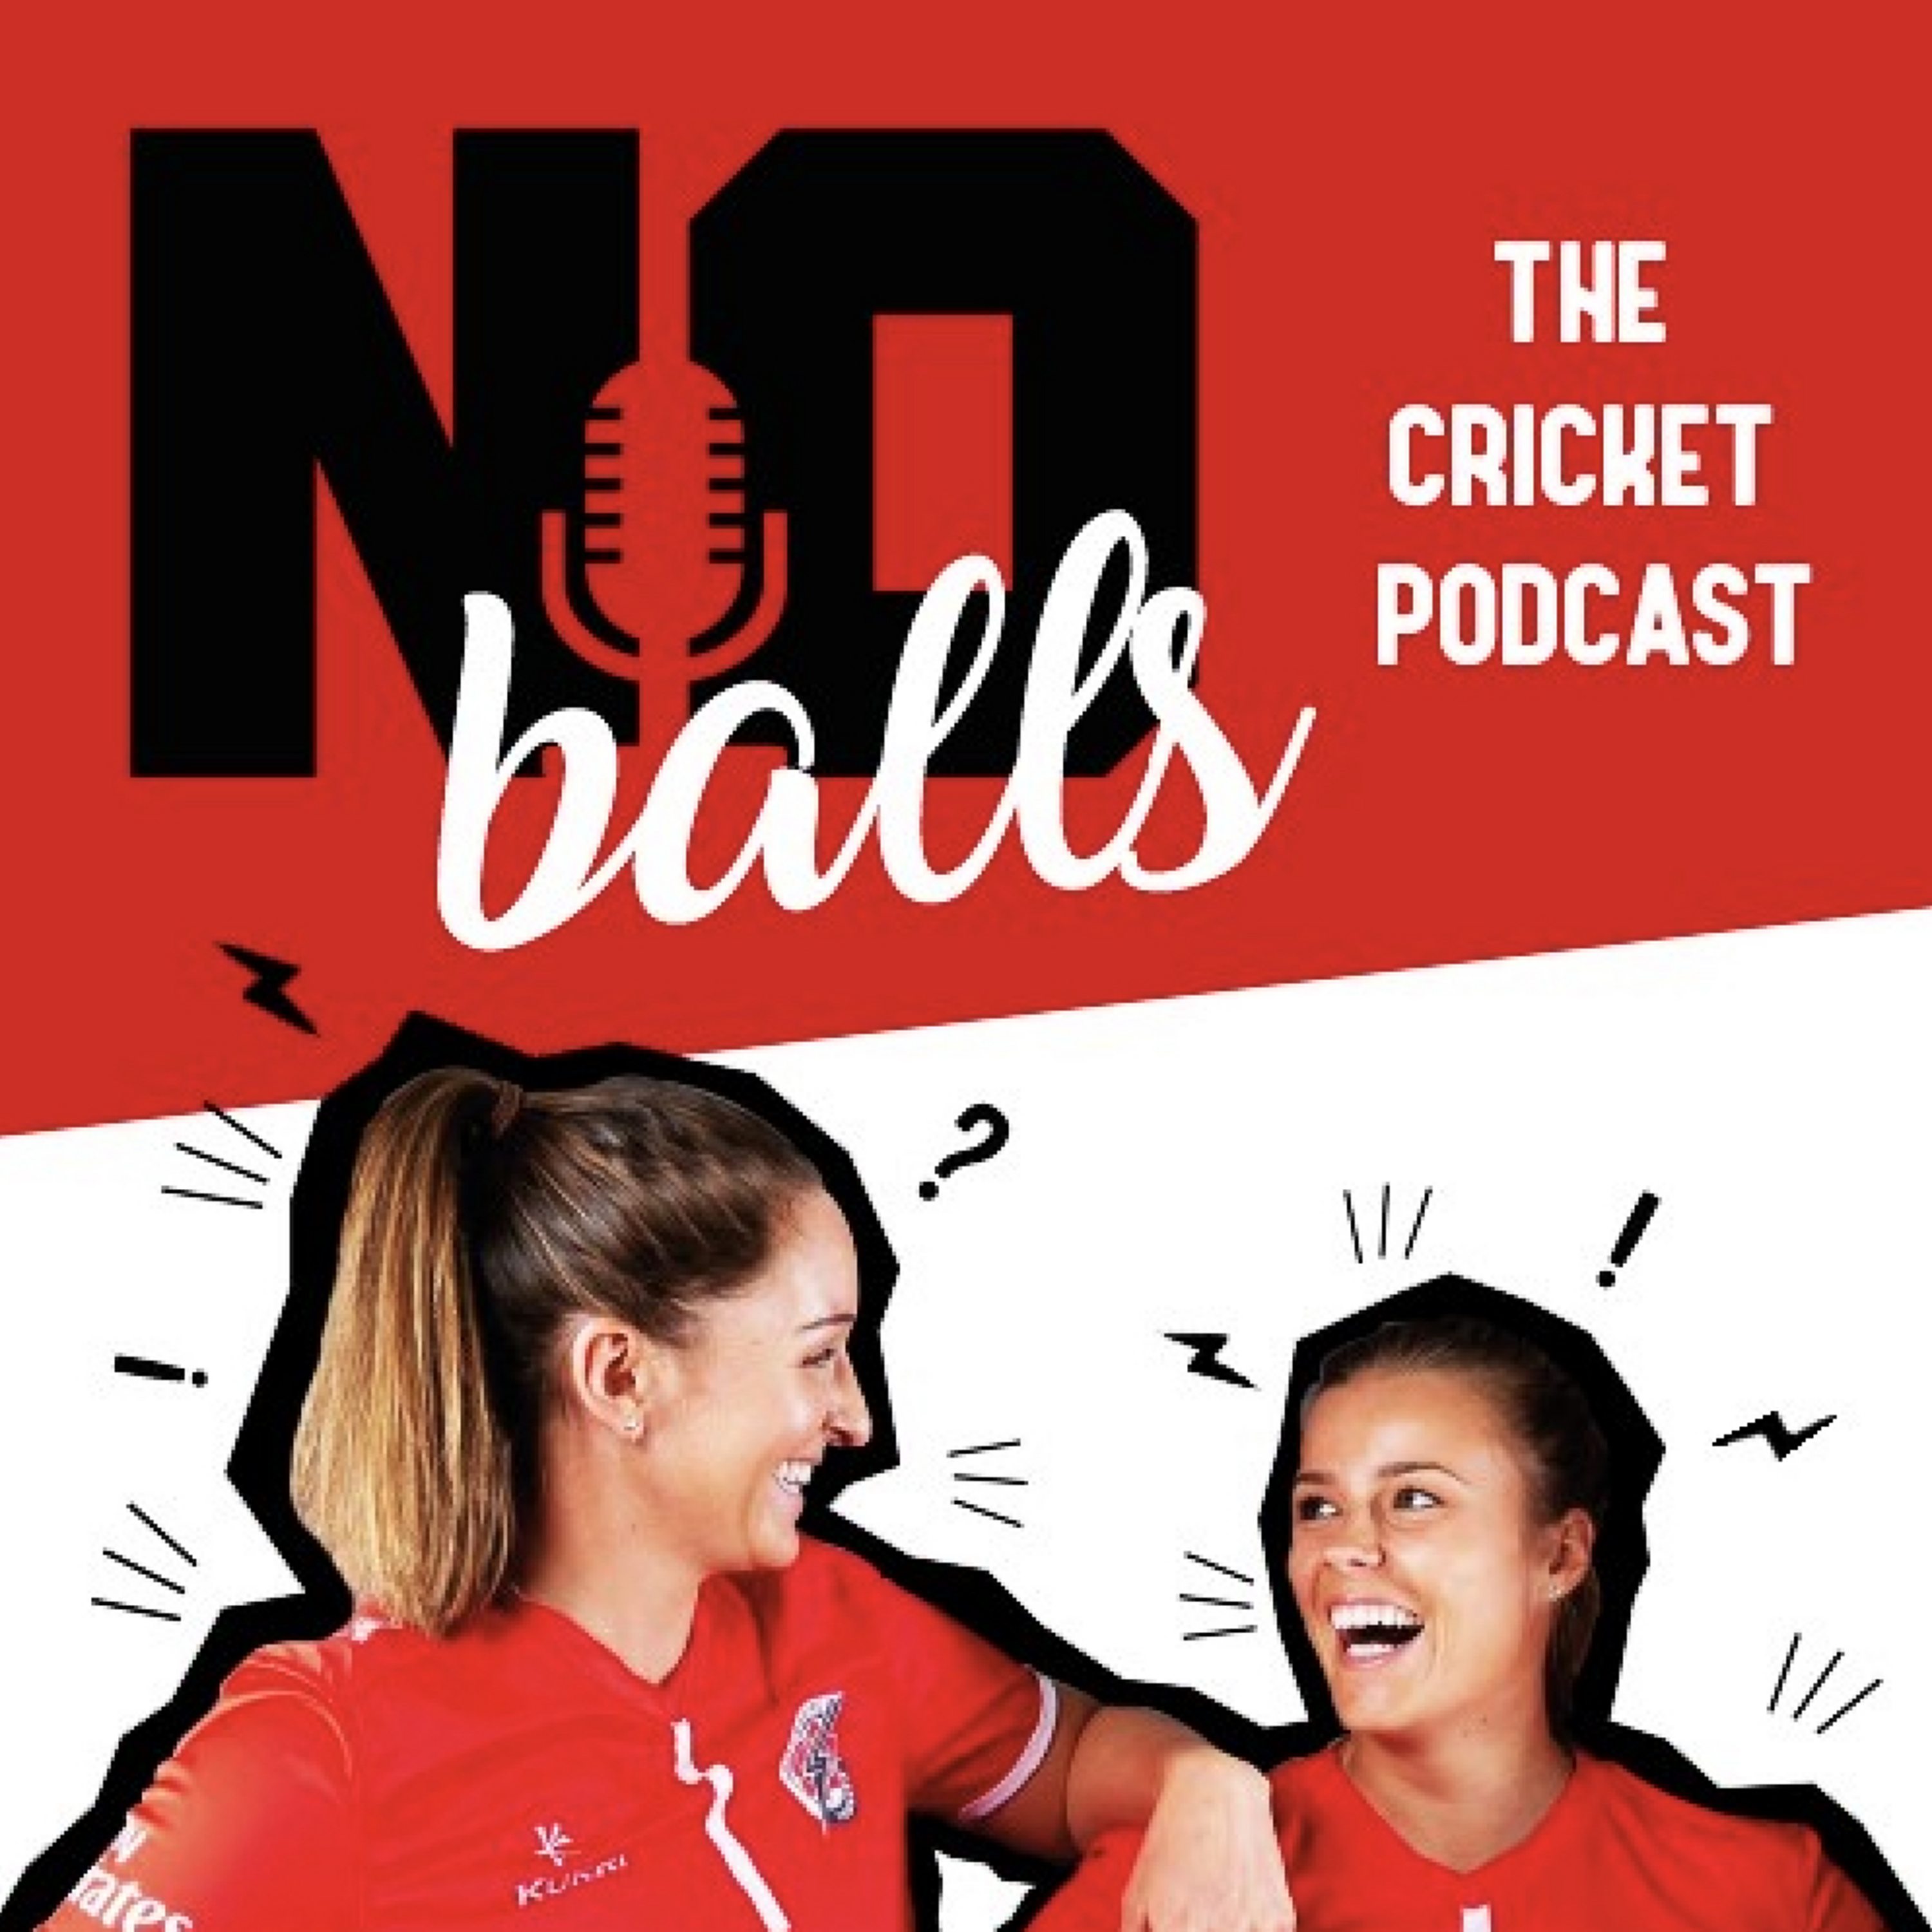 No Balls: The Cricket Podcast - You've always got us...